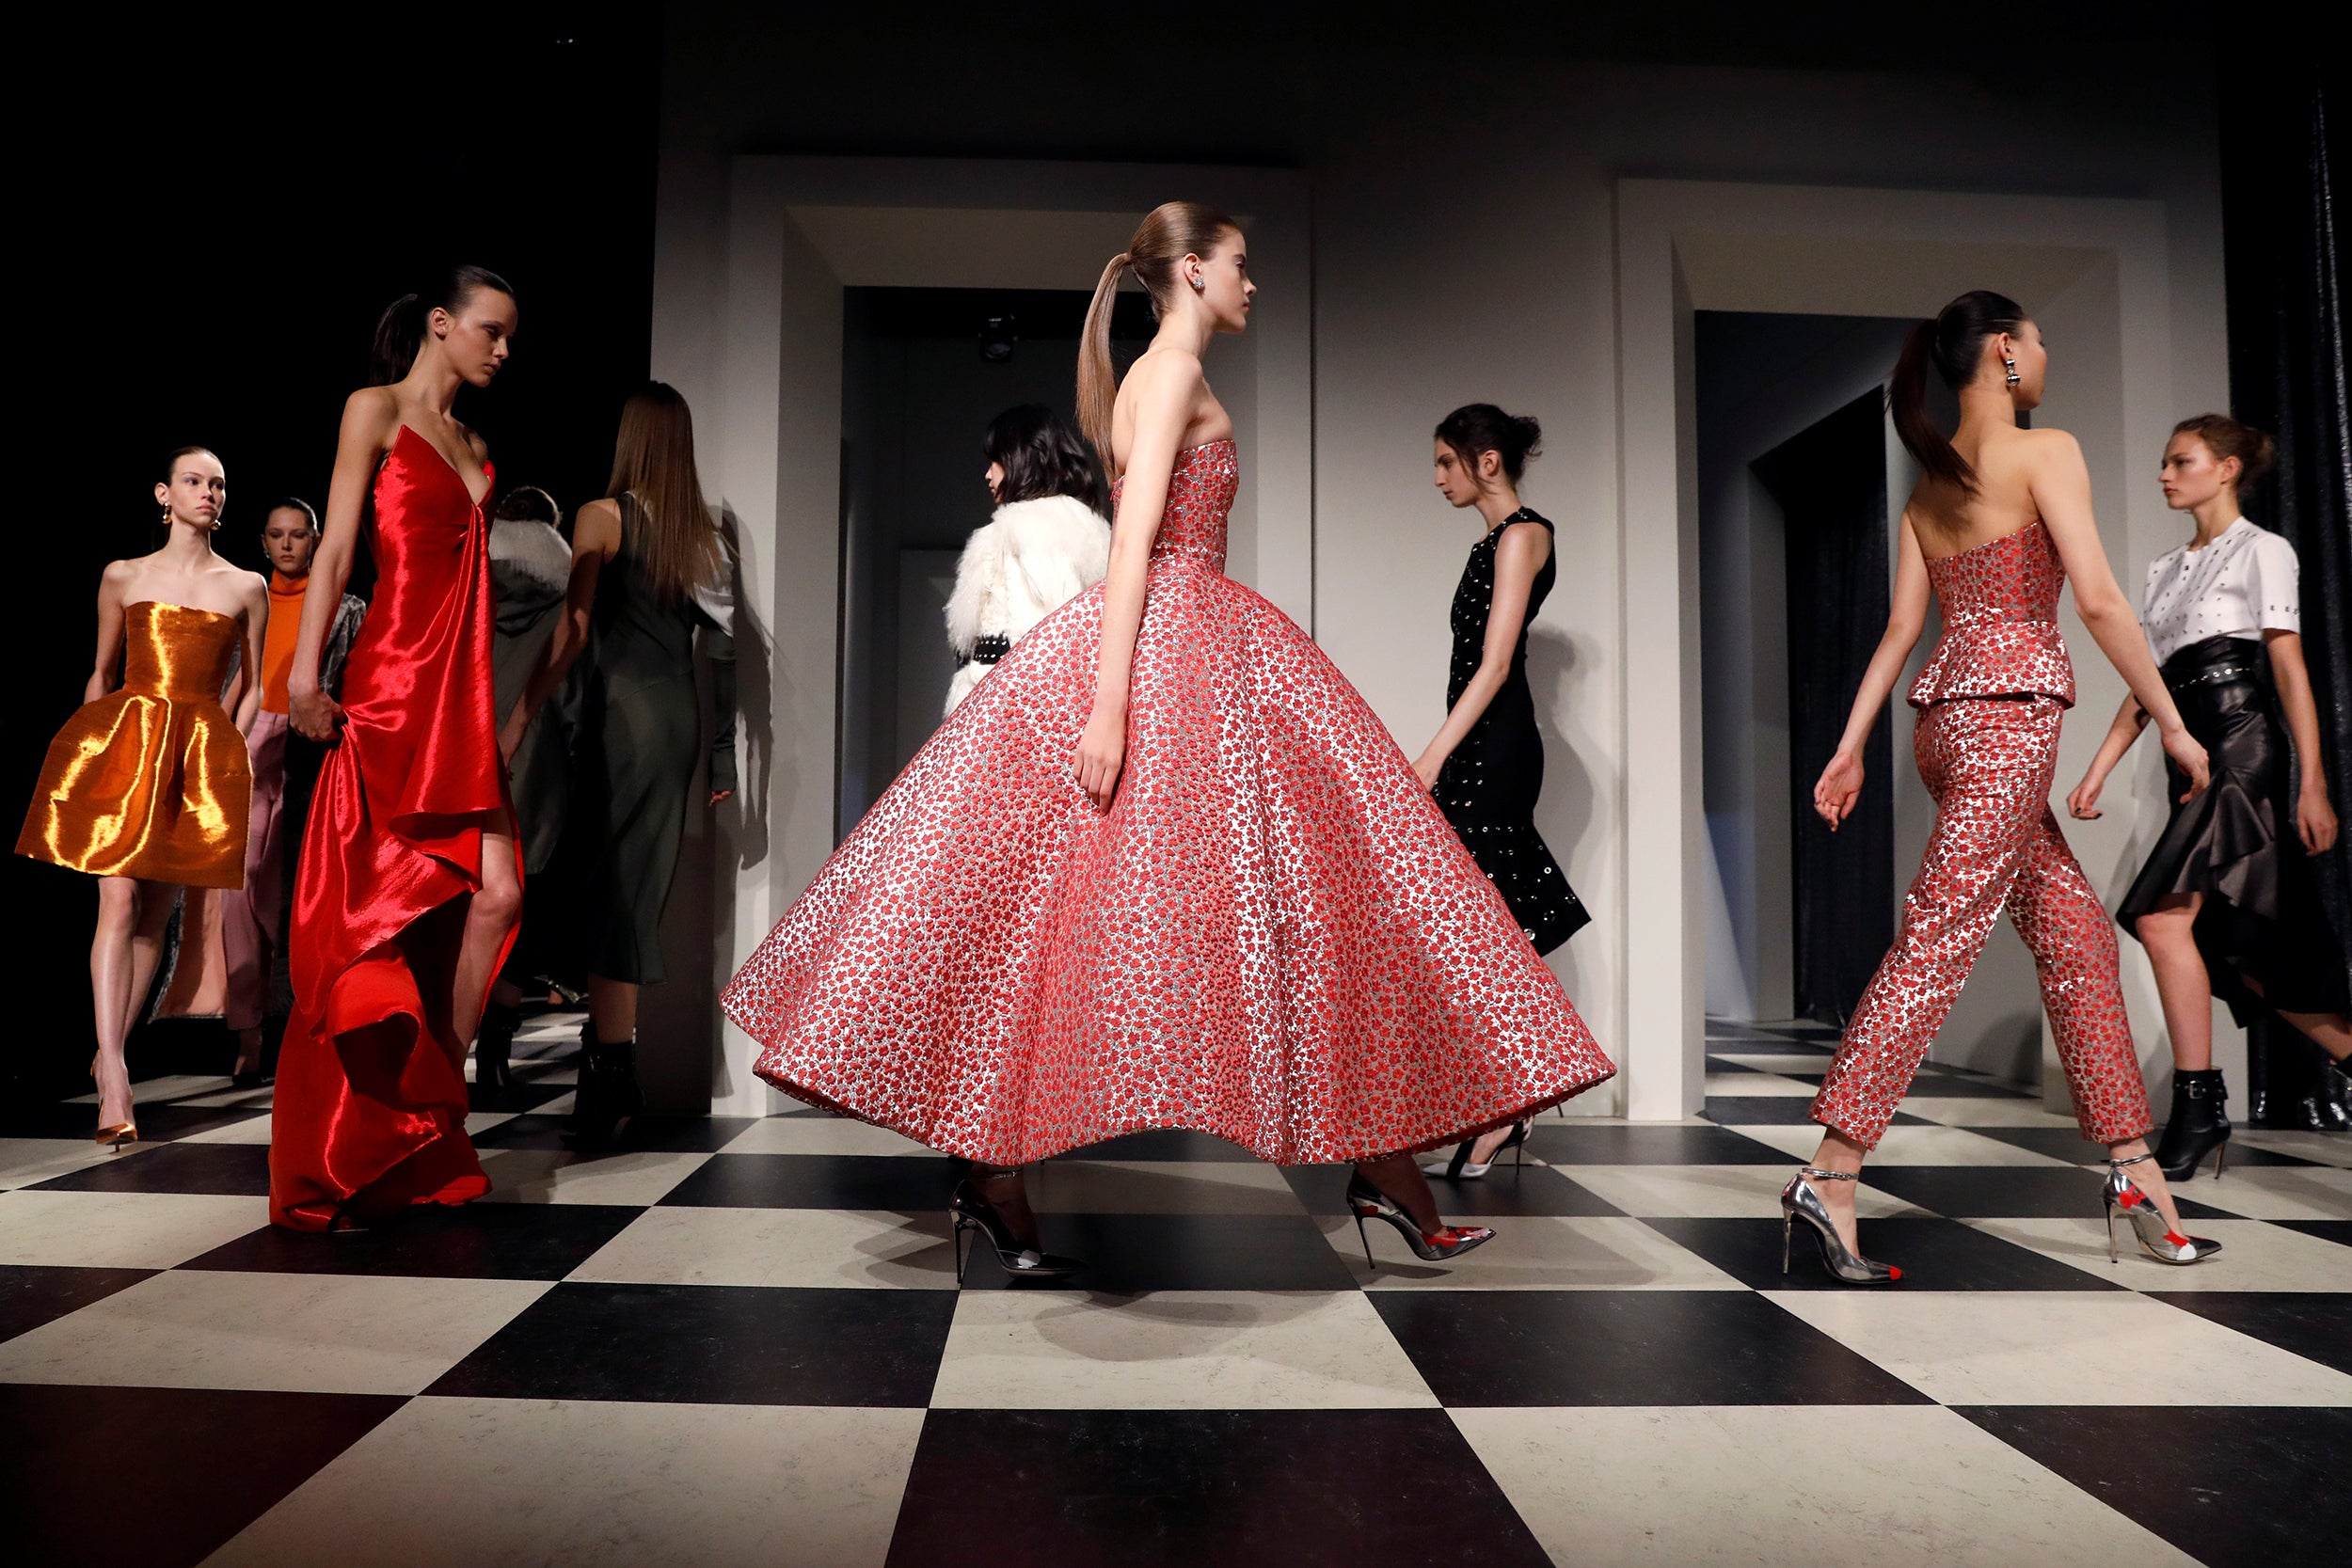 Oscar de la Renta is one of a handful of names that matter in terms of broad influence and renown